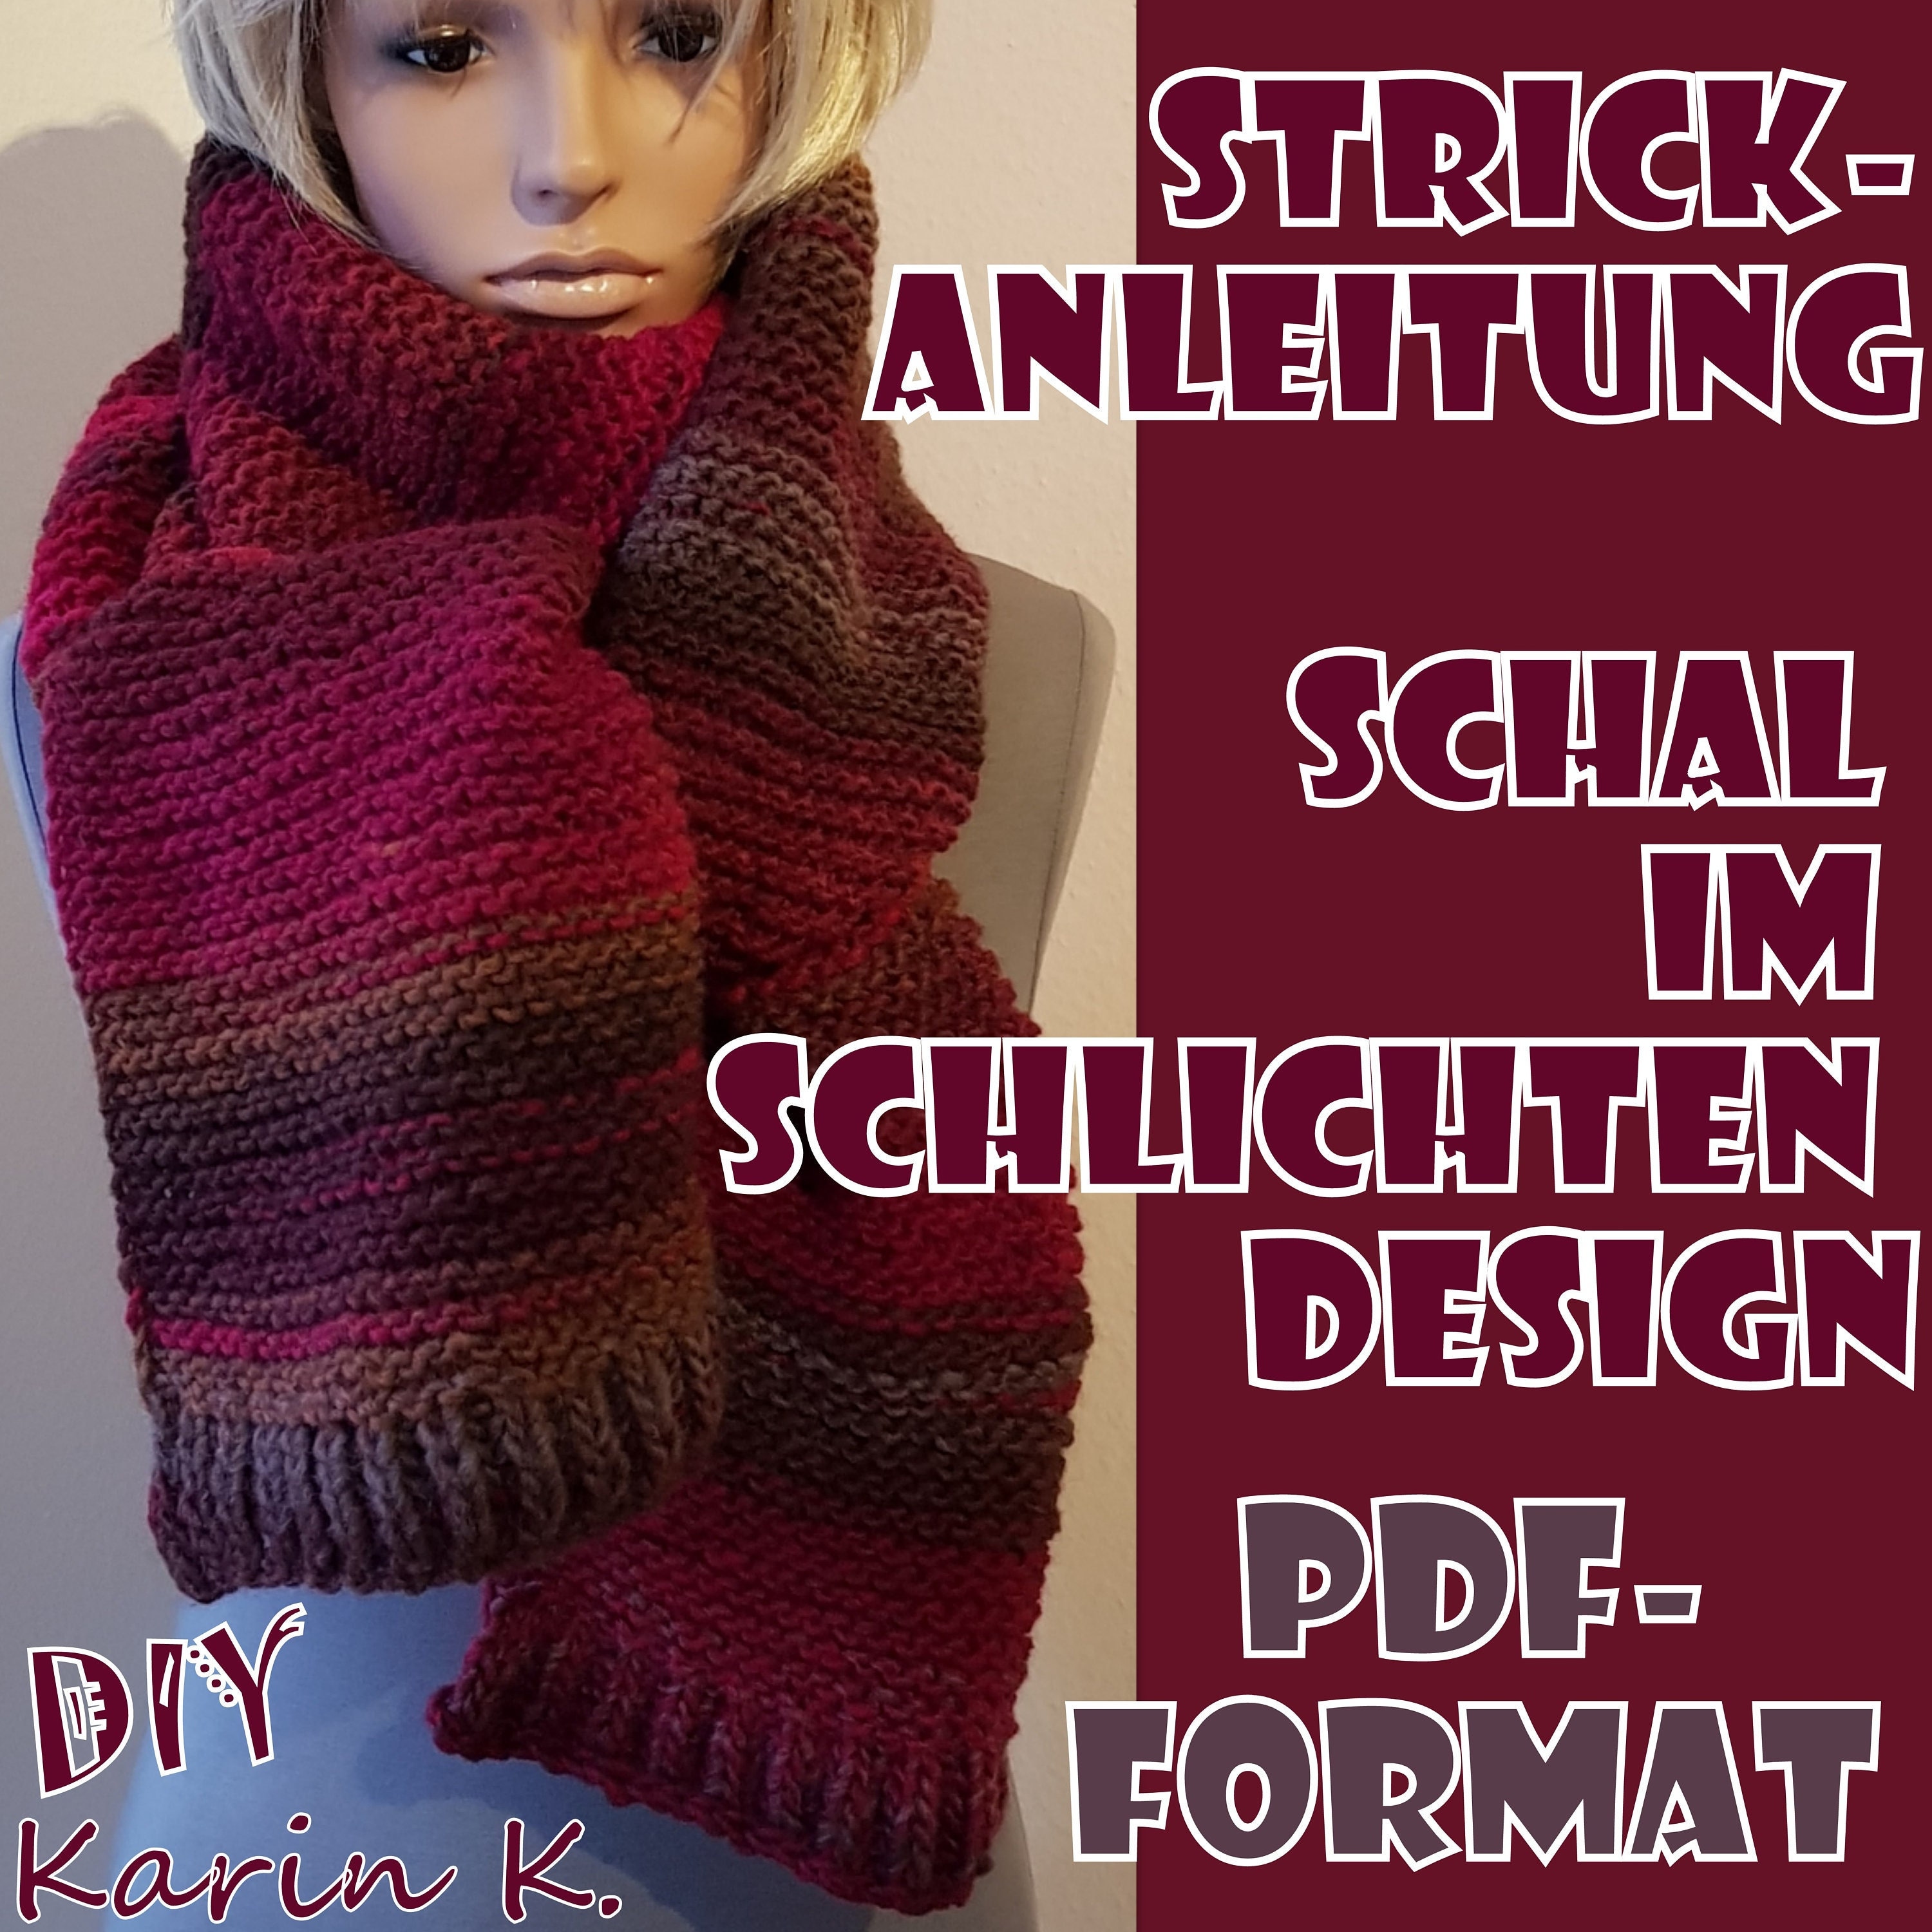 Step-by-step - File Beginners Instructions SCARF PDF DIY KNITTING German for in Etsy Suitable INSTRUCTIONS Knitting